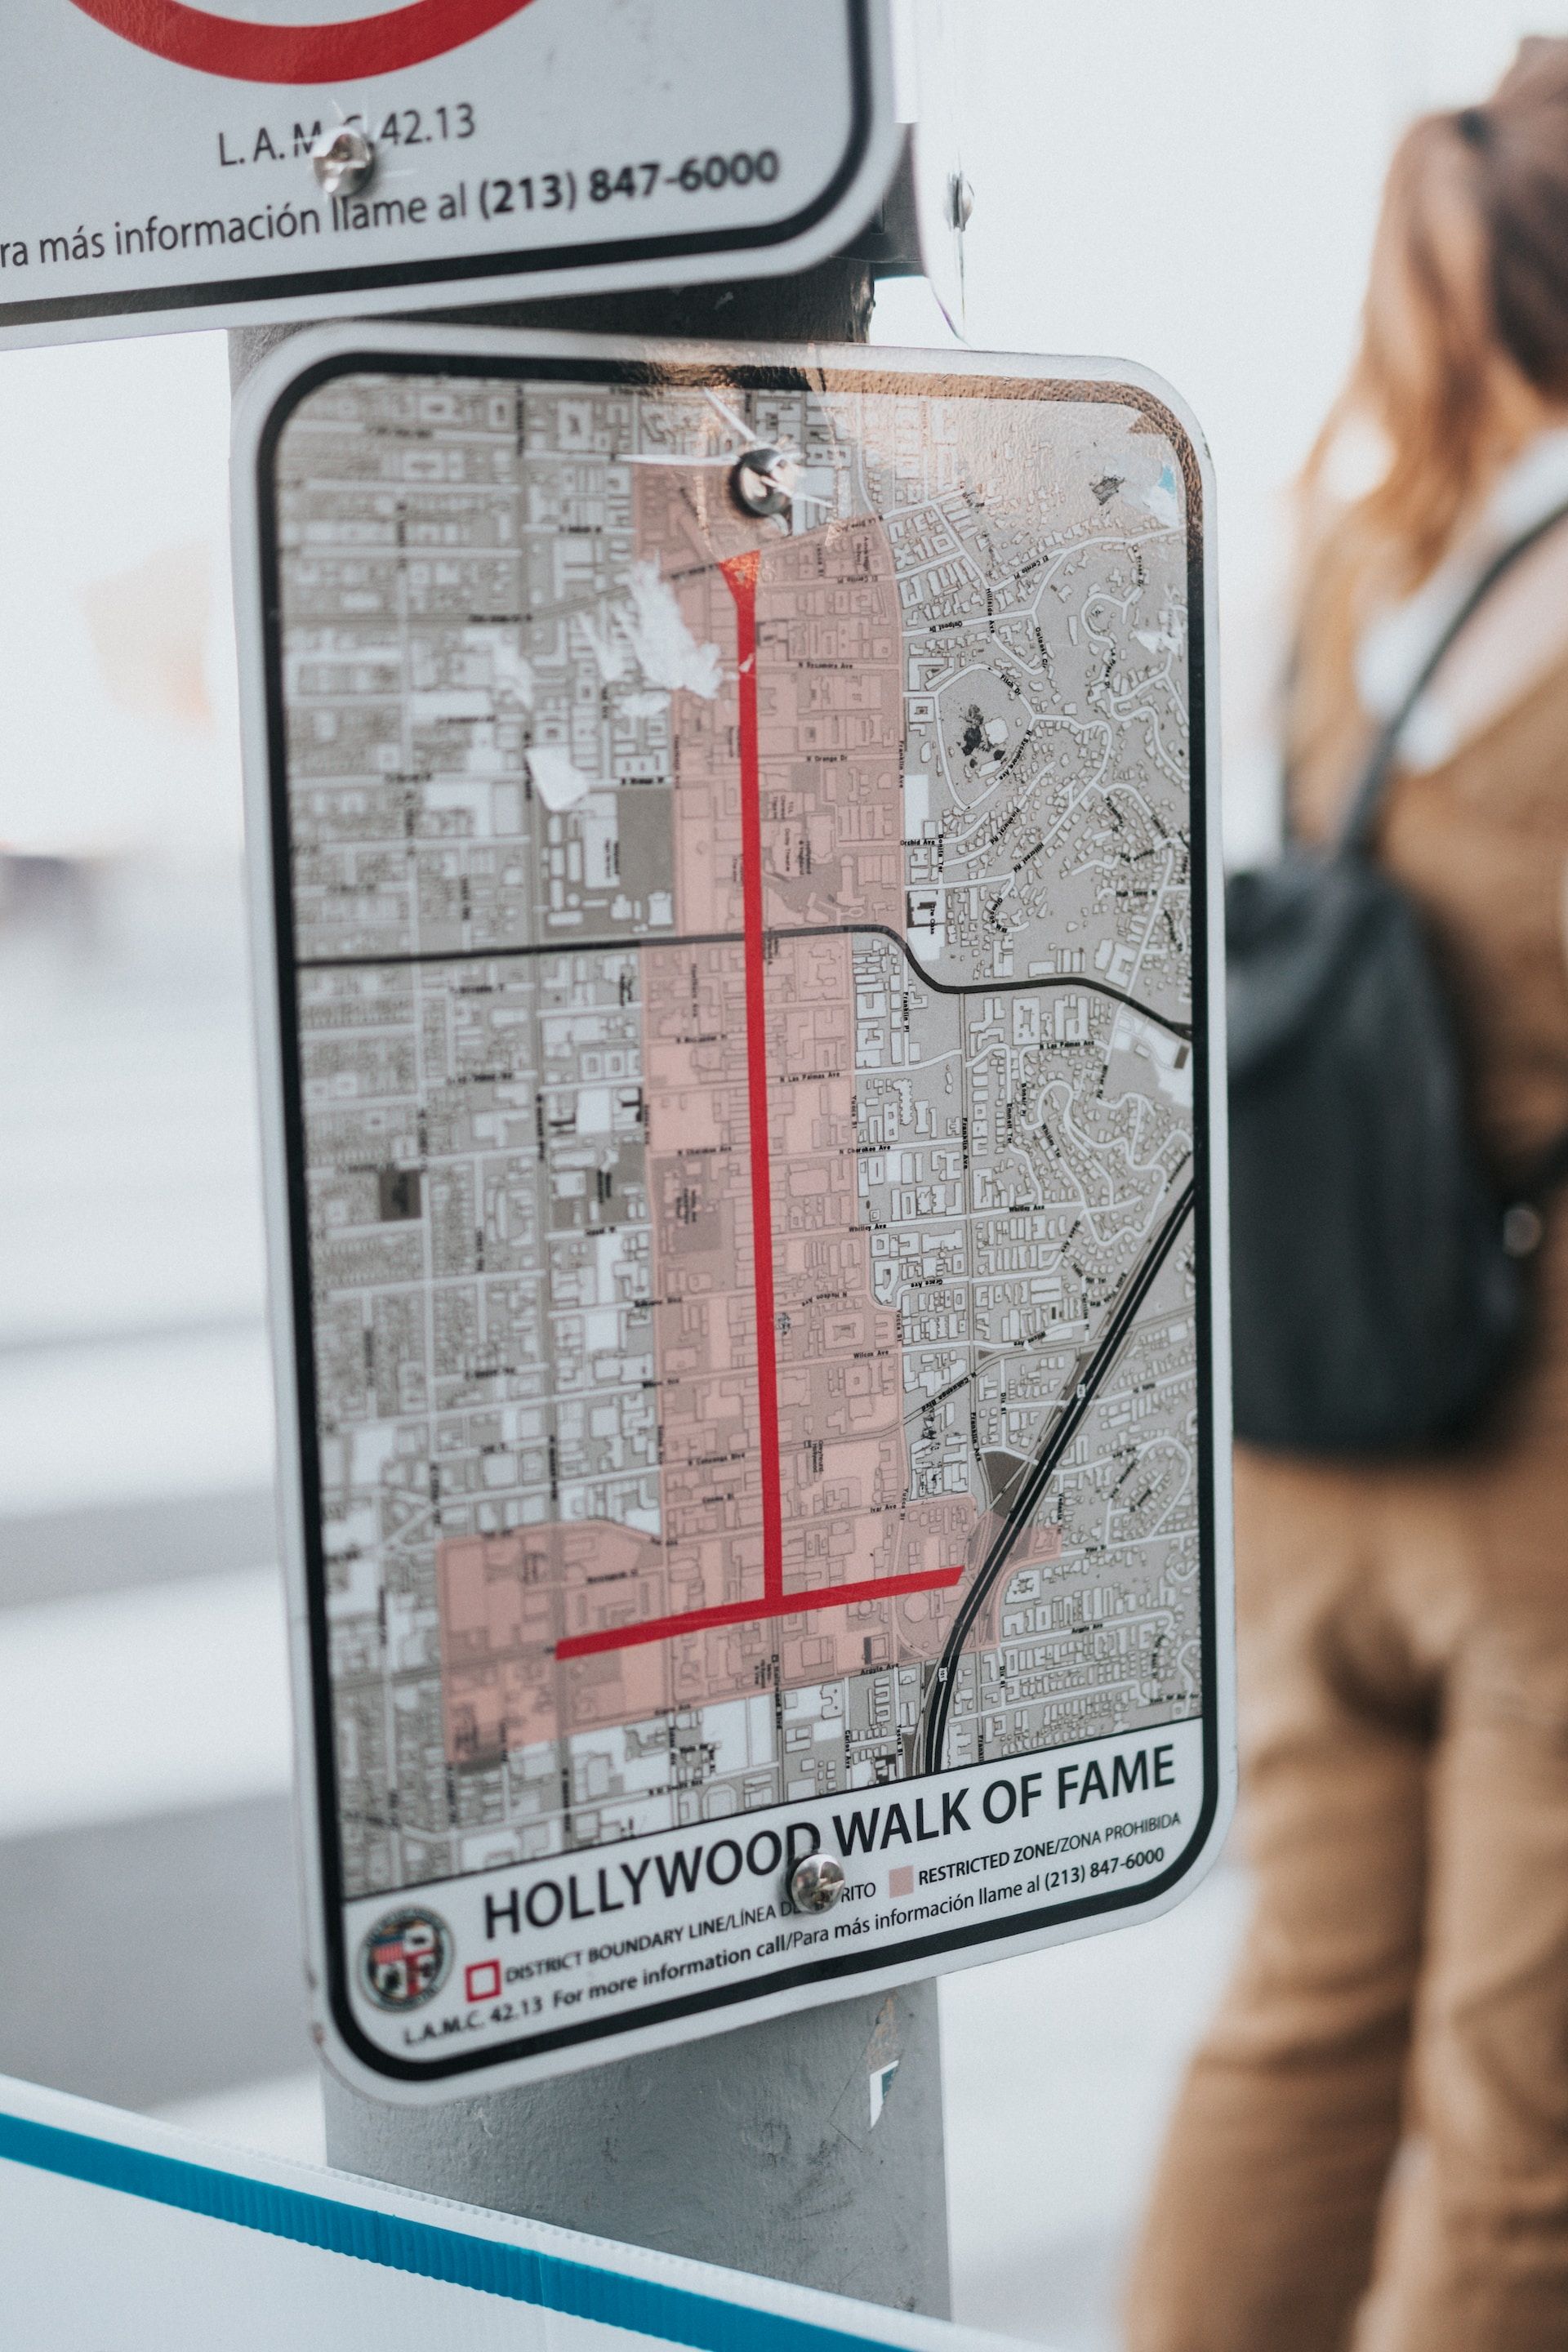 Hollywood Walk of Fame Street sign with map